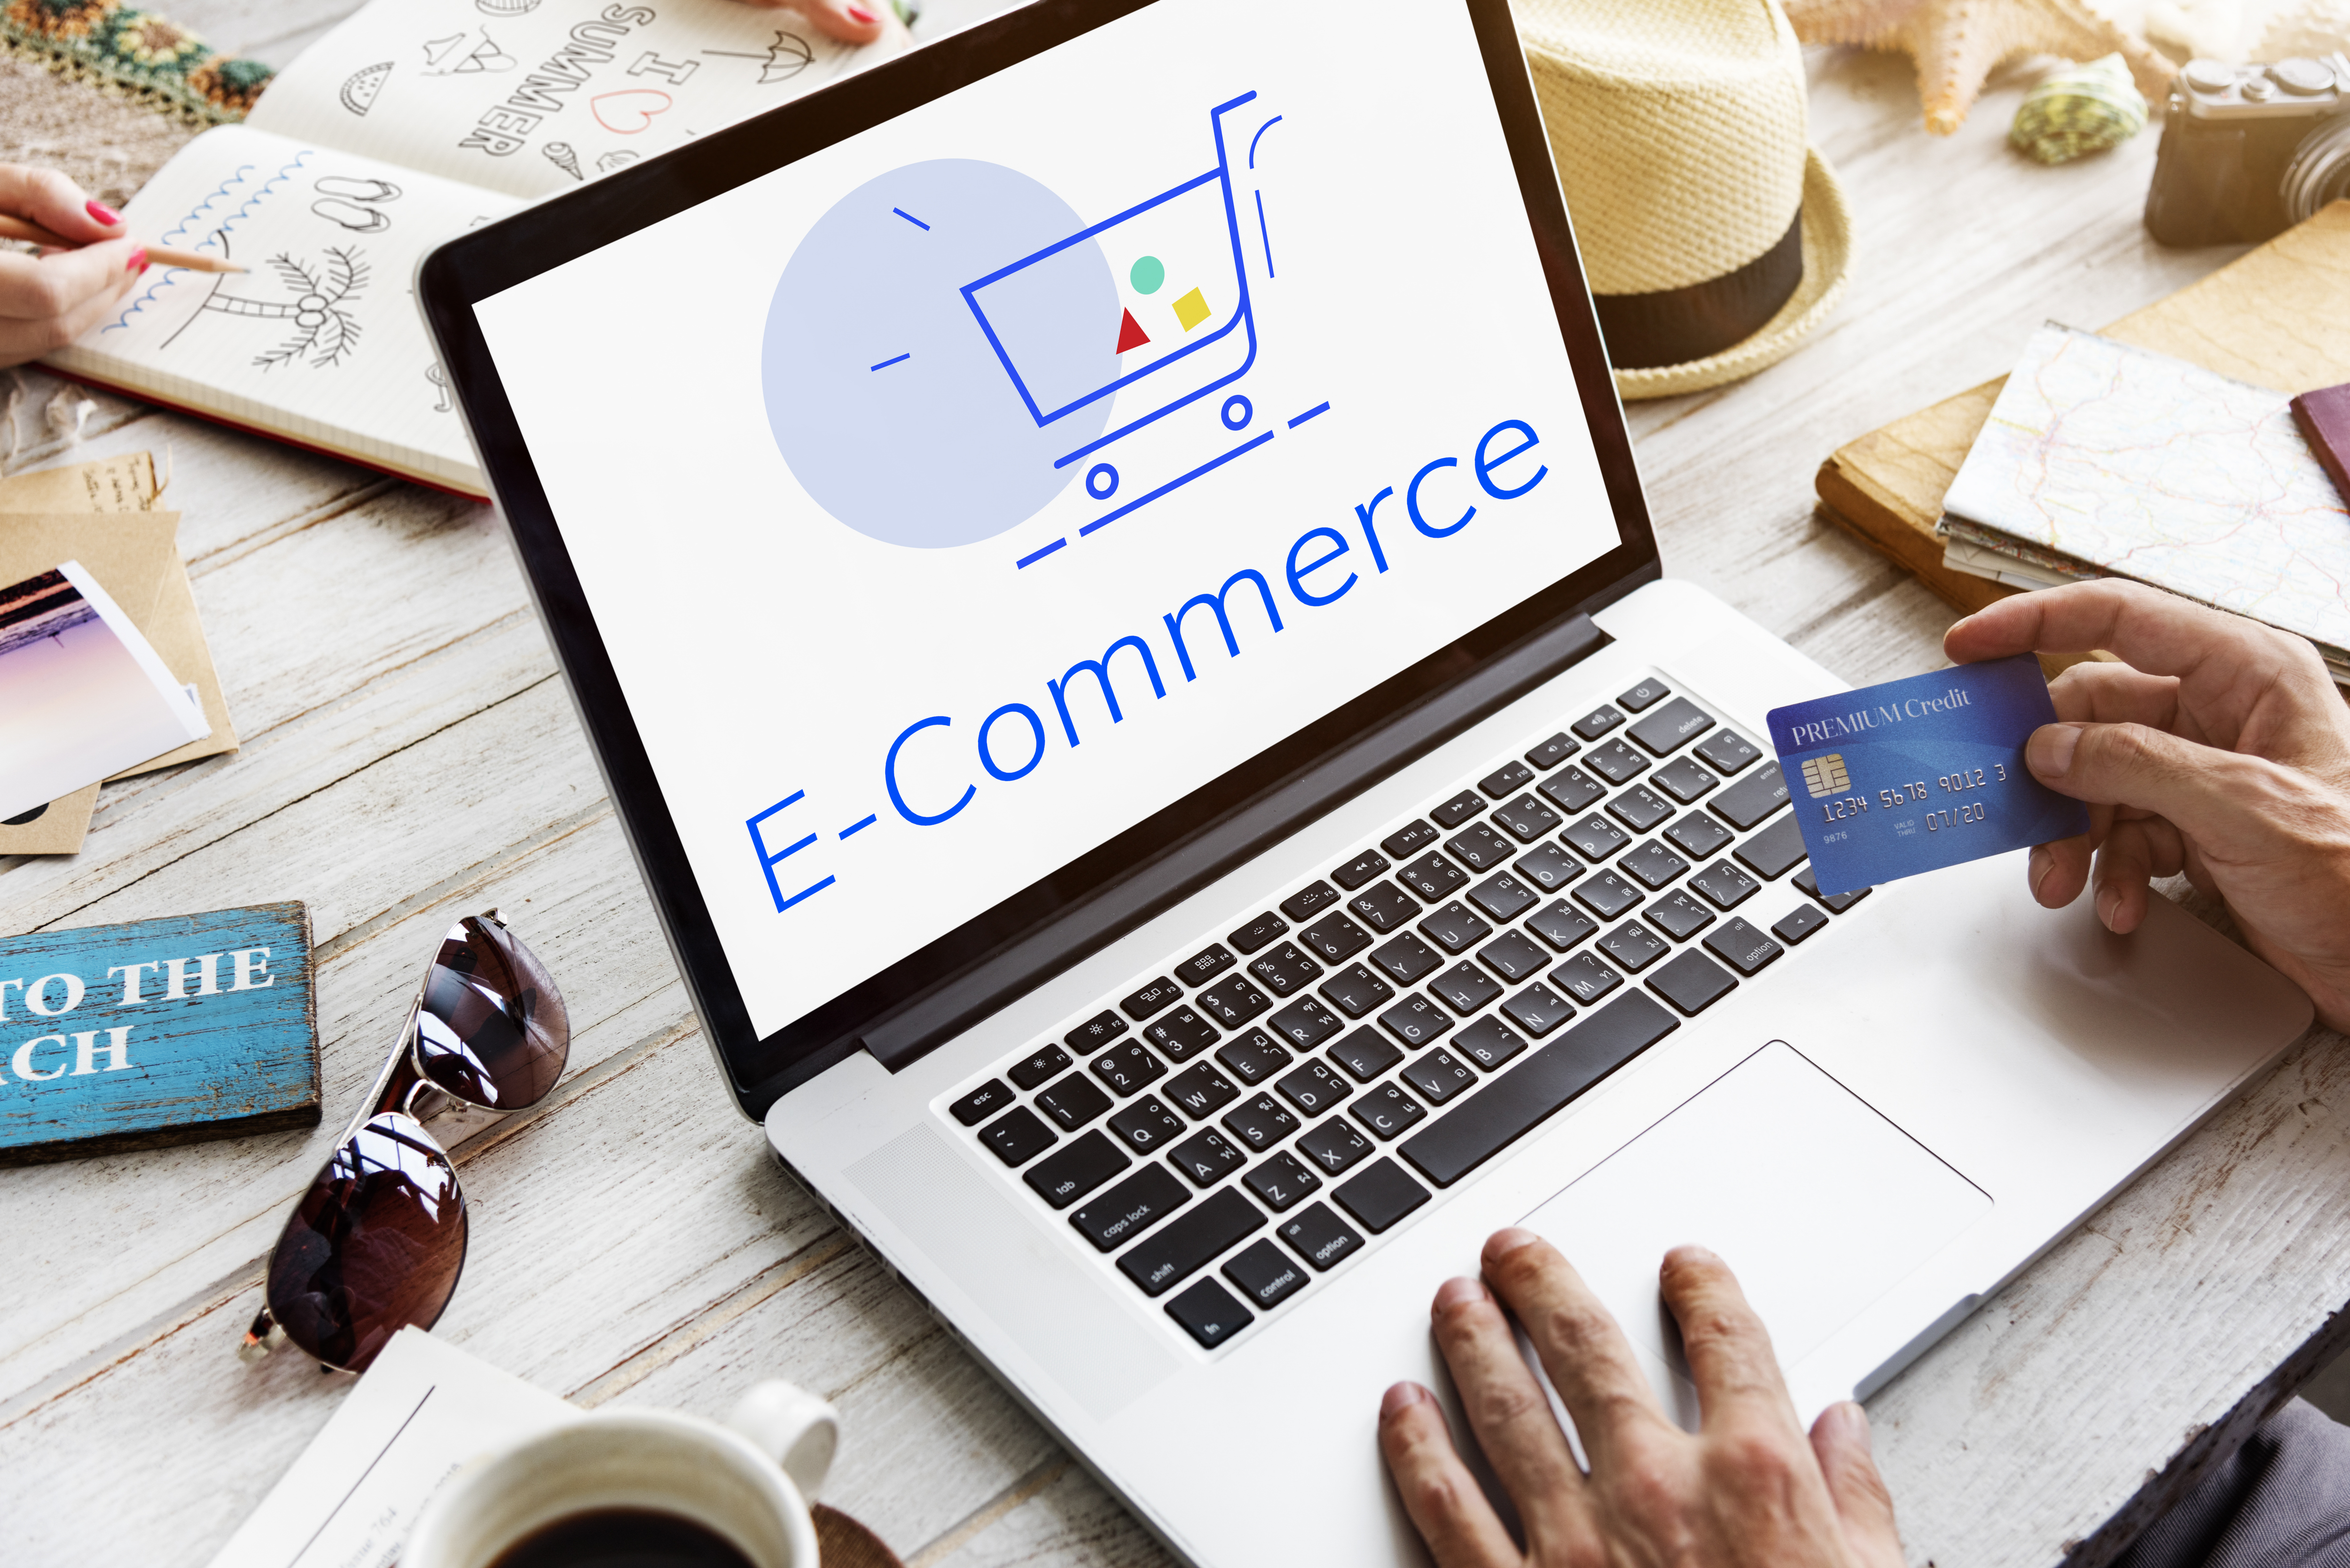 How to Make Your Ecommerce Website Stand Out